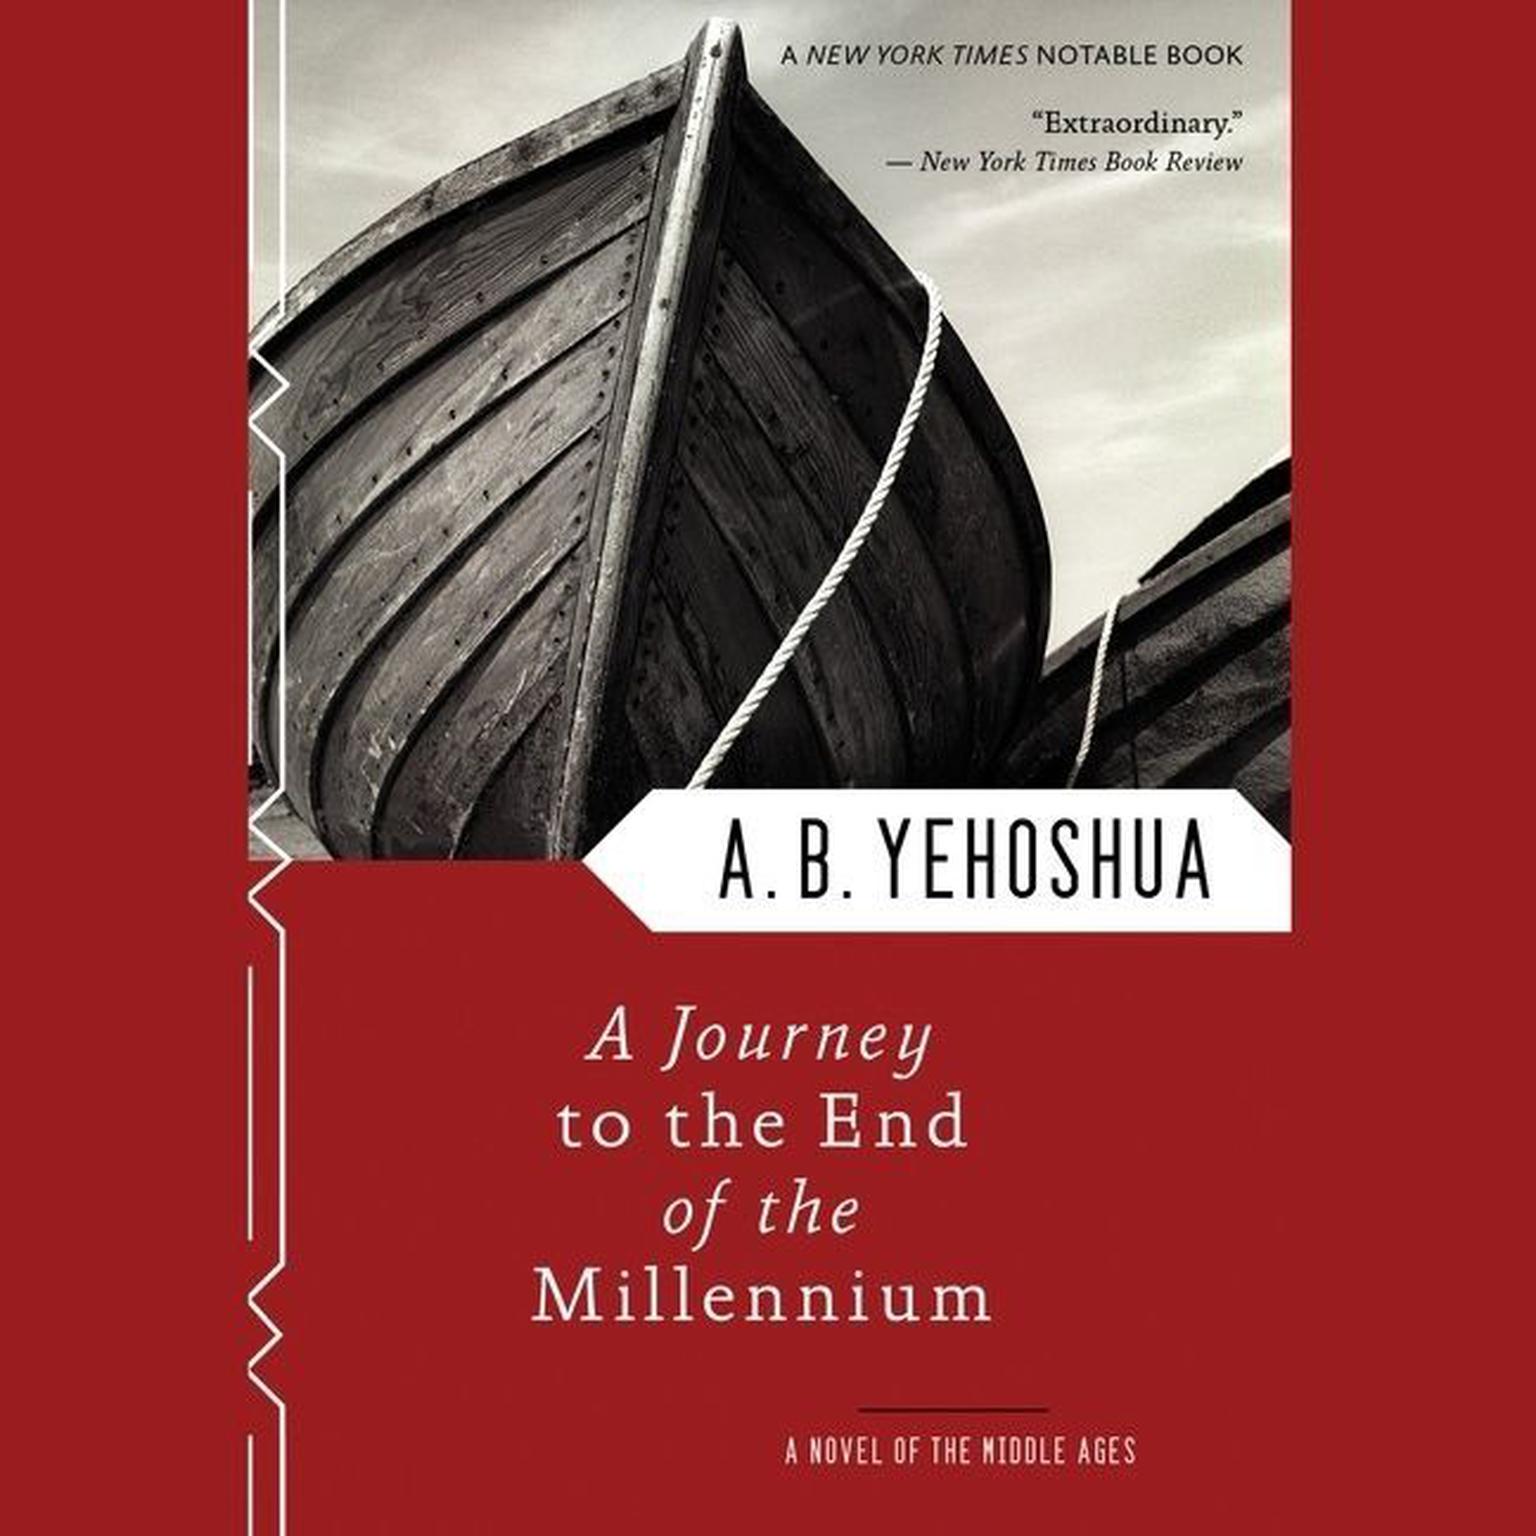 A Journey To The End Of The Millennium: A Novel of the Middle Ages Audiobook, by A. B. Yehoshua